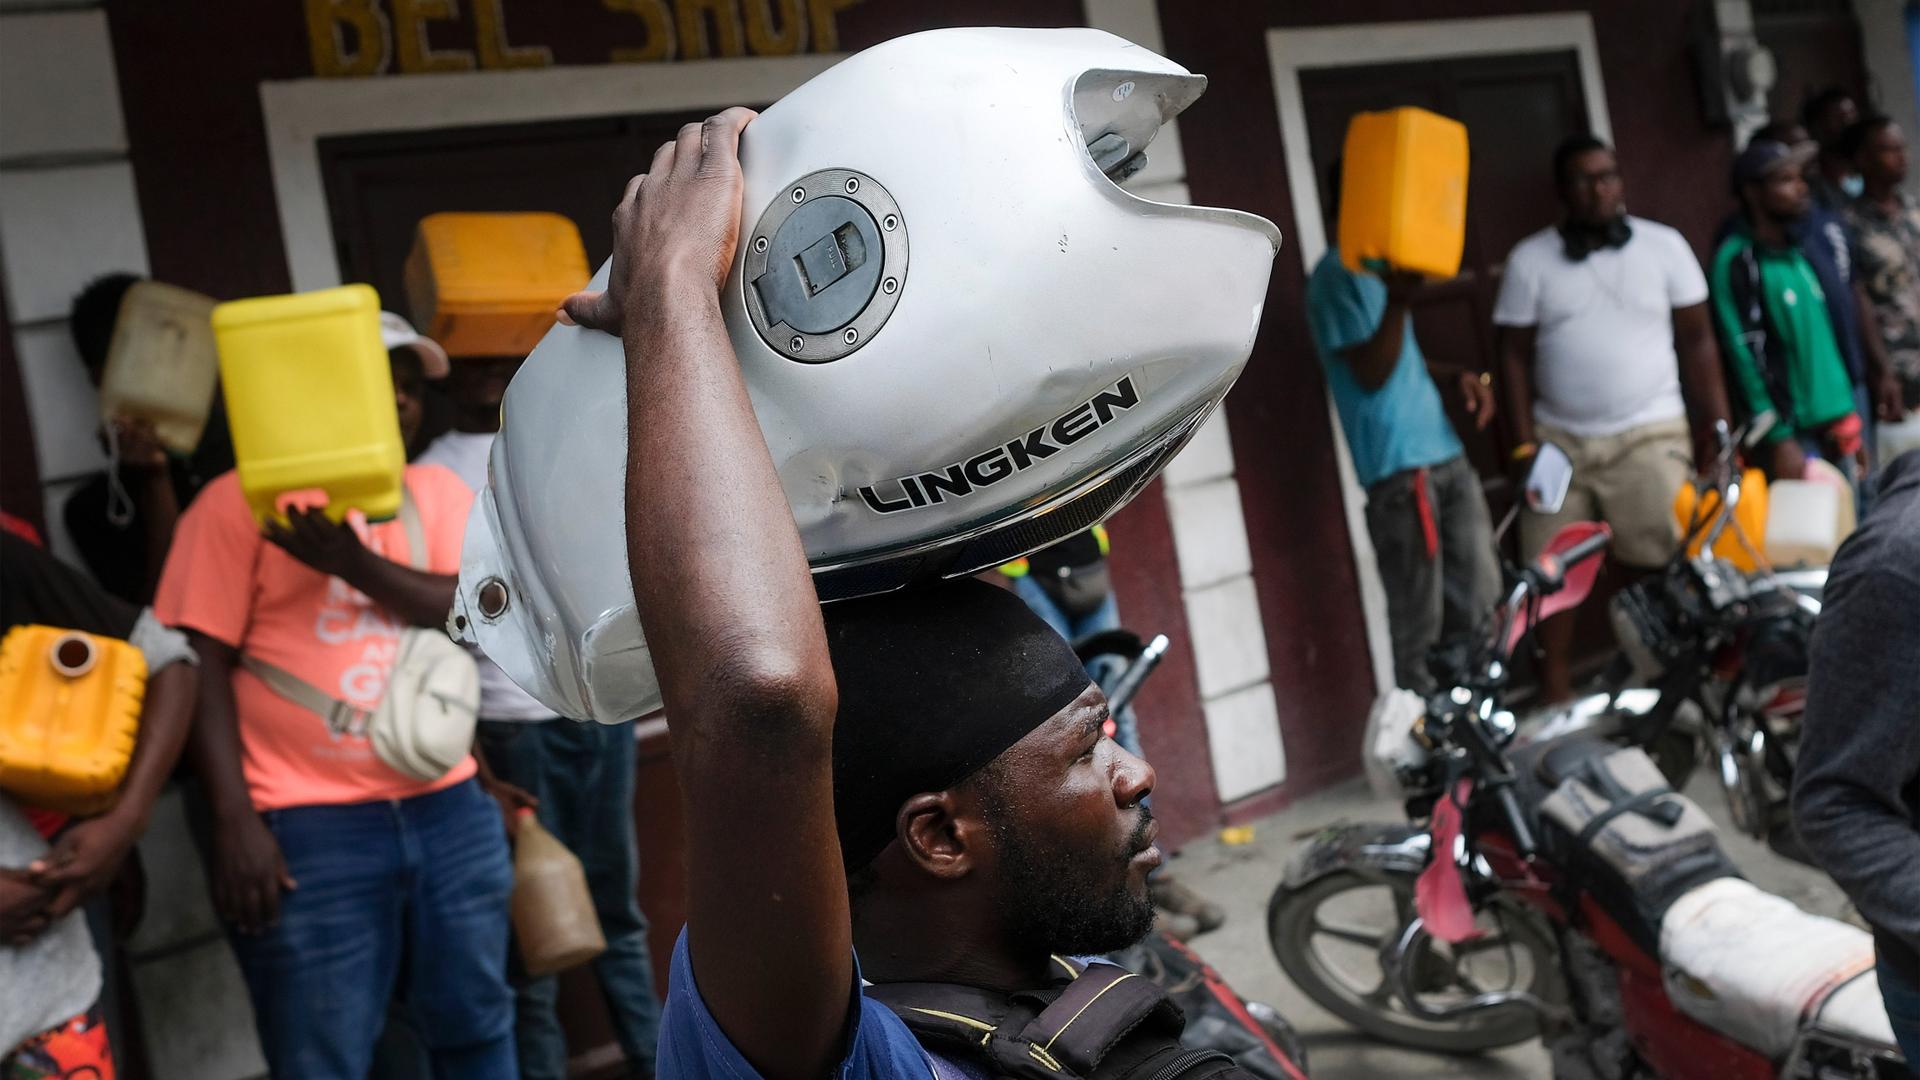 A man balances his motorbike tank on his head as he waits outside a gas station in hopes of filling his tank, in Port-au-Prince, Haiti, on Oct. 23, 2021. The ongoing fuel shortage has worsened, with demonstrators blocking roads and burning tires in Haiti'